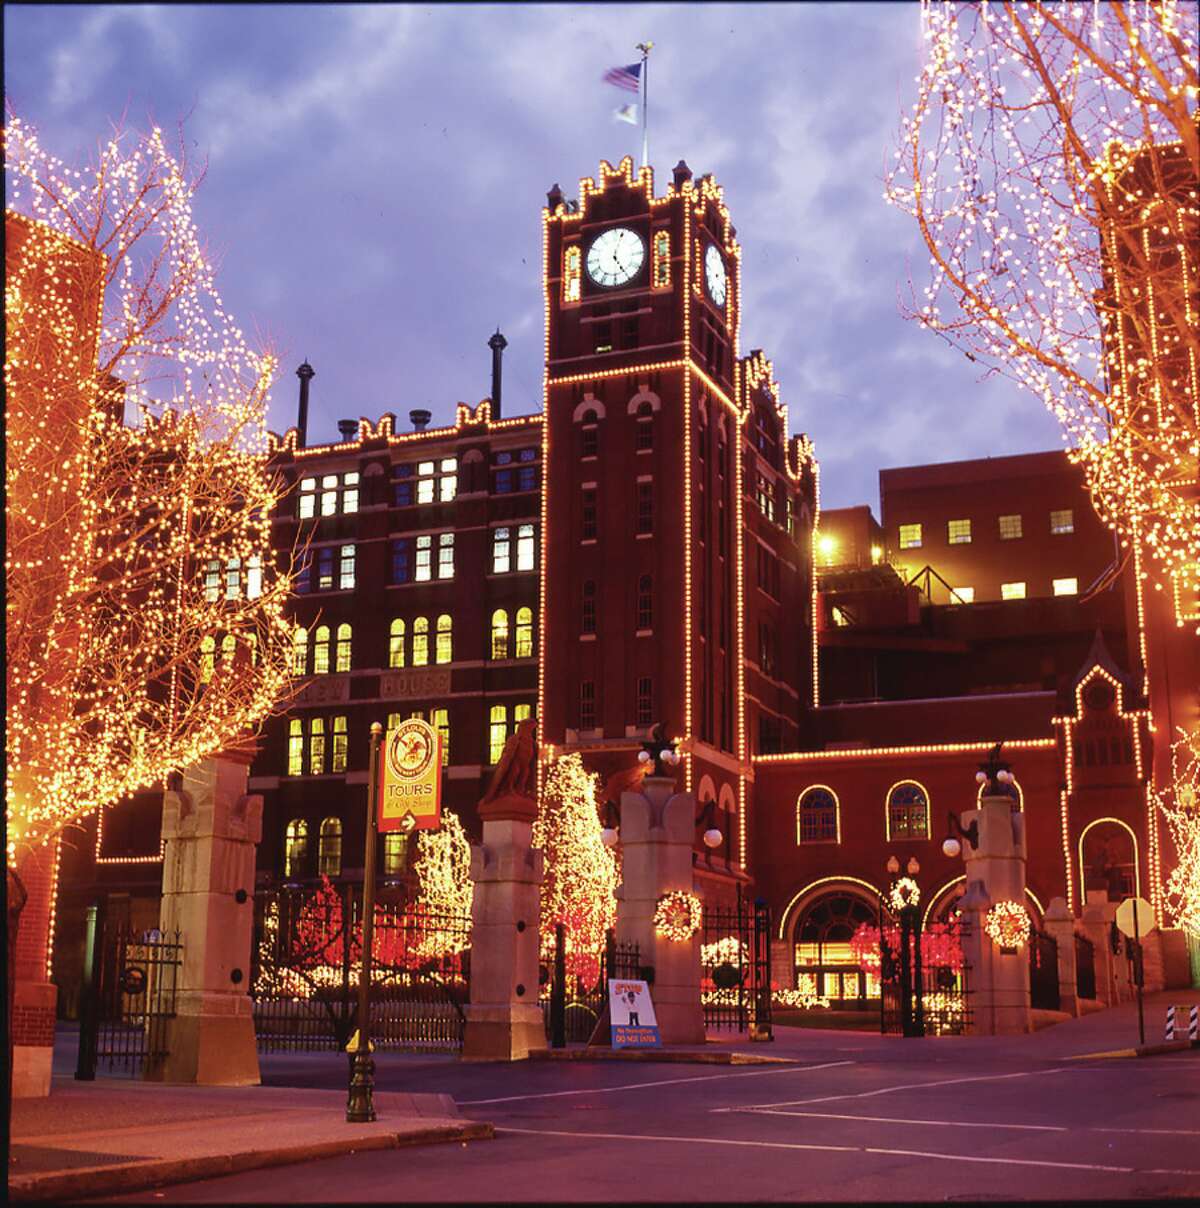 The Anheuser-Busch Brewery in St. Louis will conduct its 32nd Annual Brewery Lights holiday celebration from Nov. 16 through Dec. 30. Admission is free.